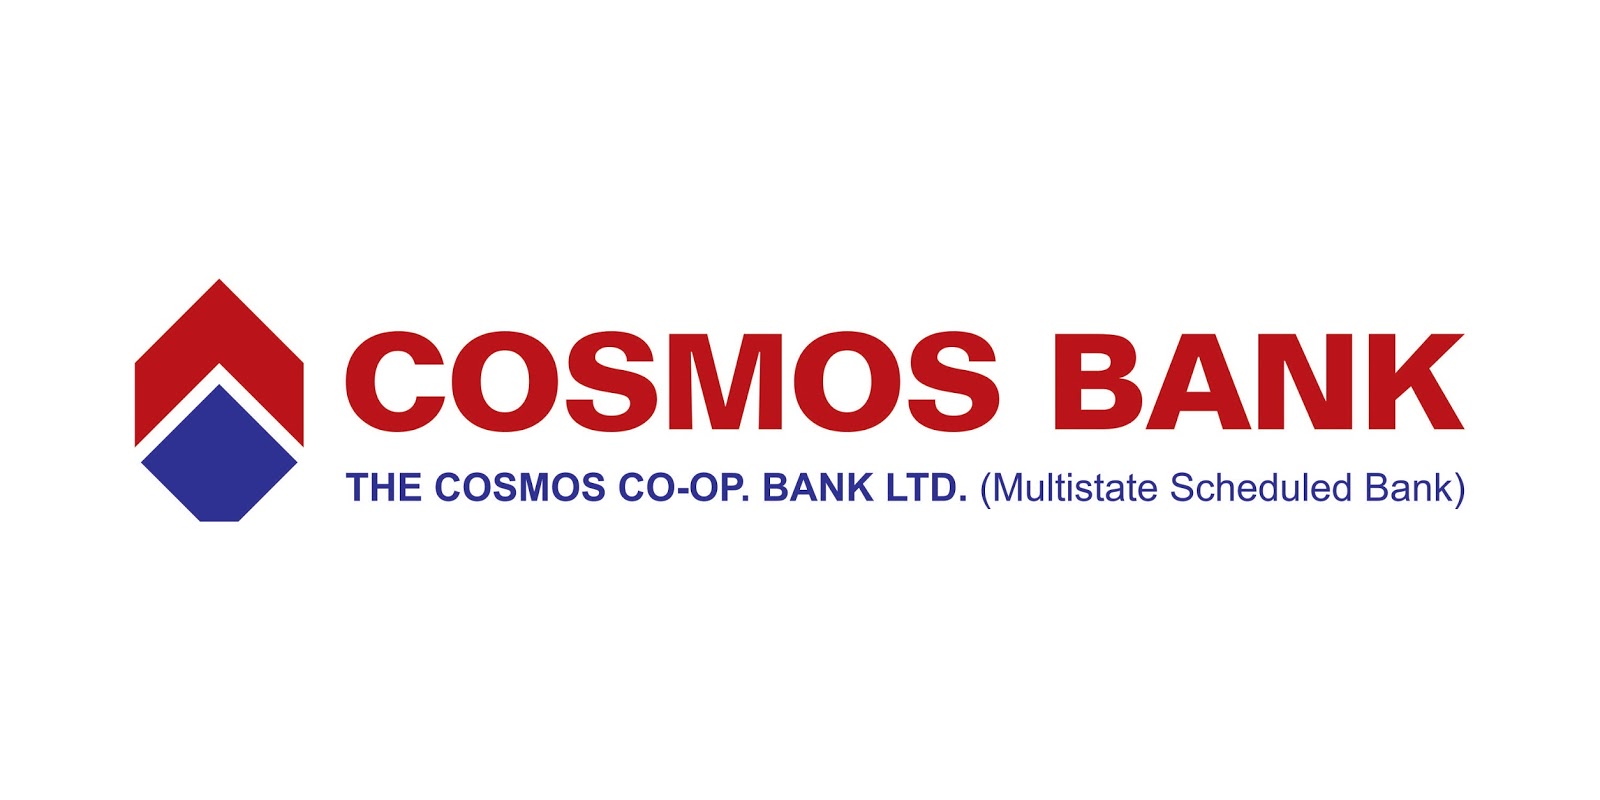 THE COSMOS CO OPERATIVE BANK LIMITED